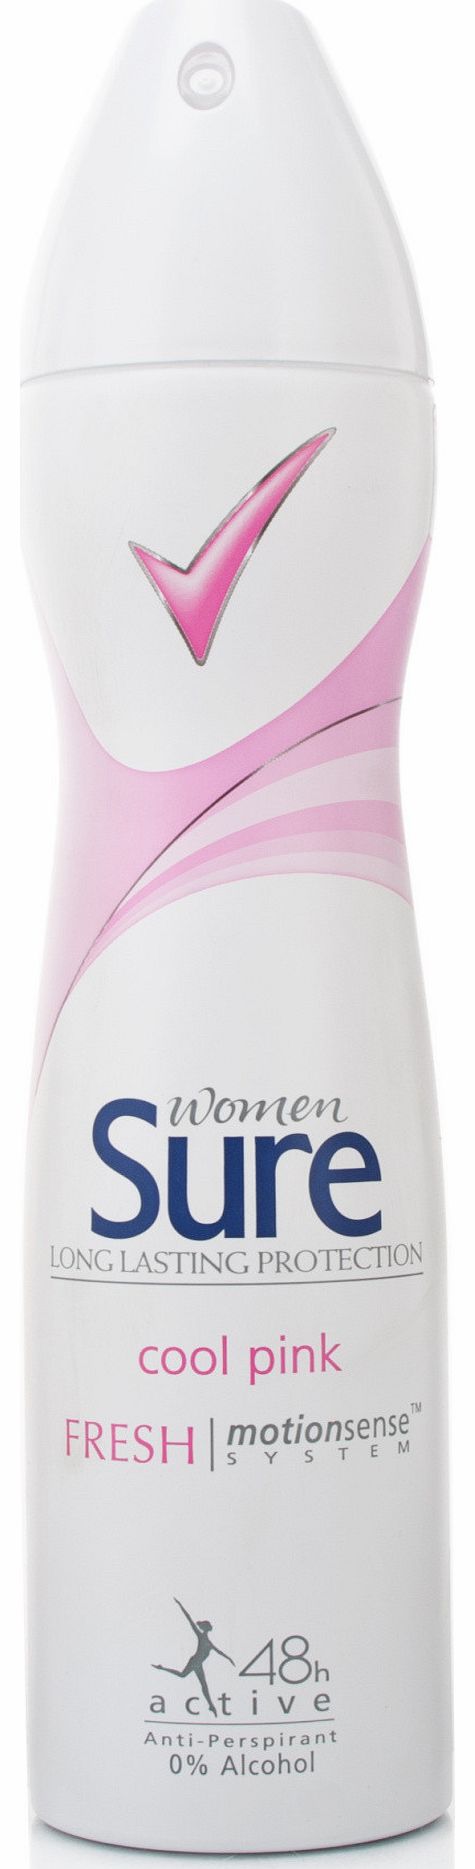 Sure Women Cool Pink Fresh 48h Active